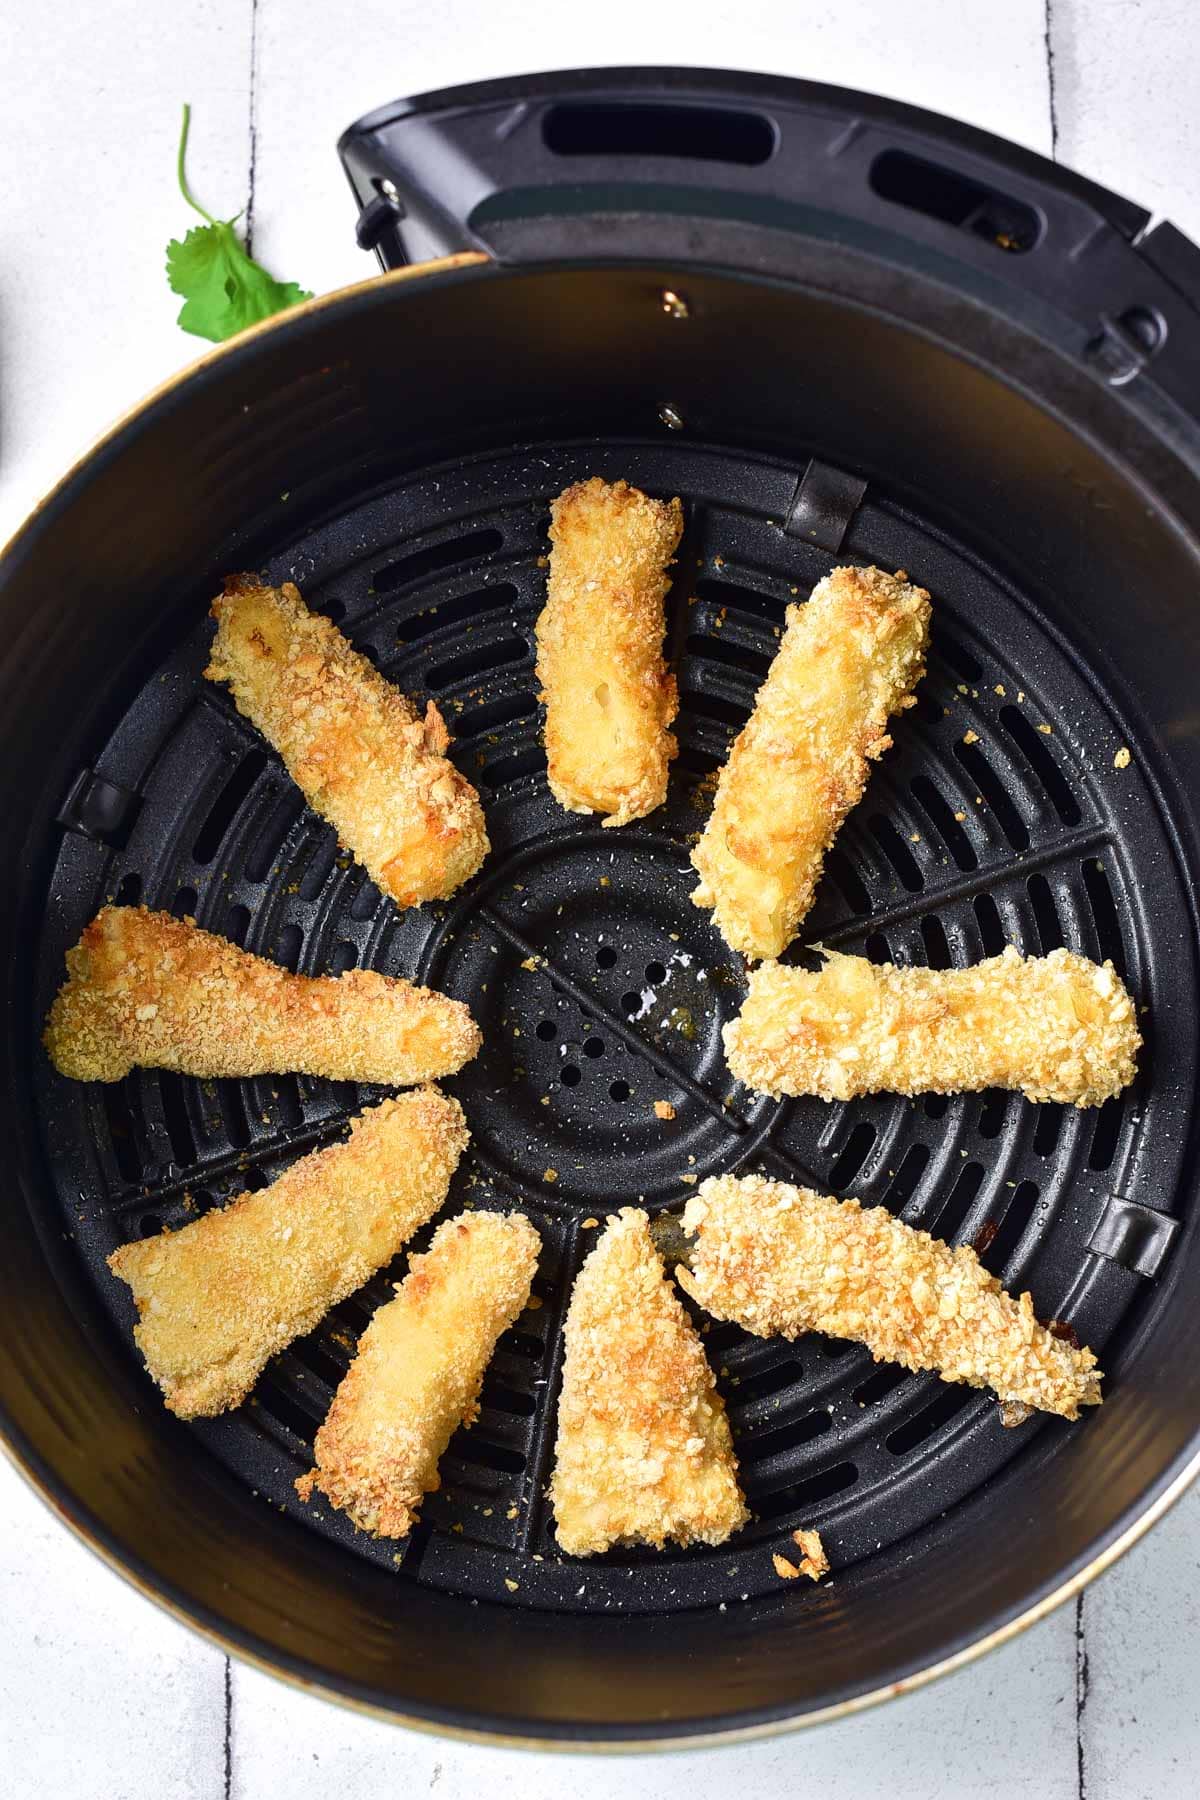 crispy pieces of breaded fish in round black air fryer basket.